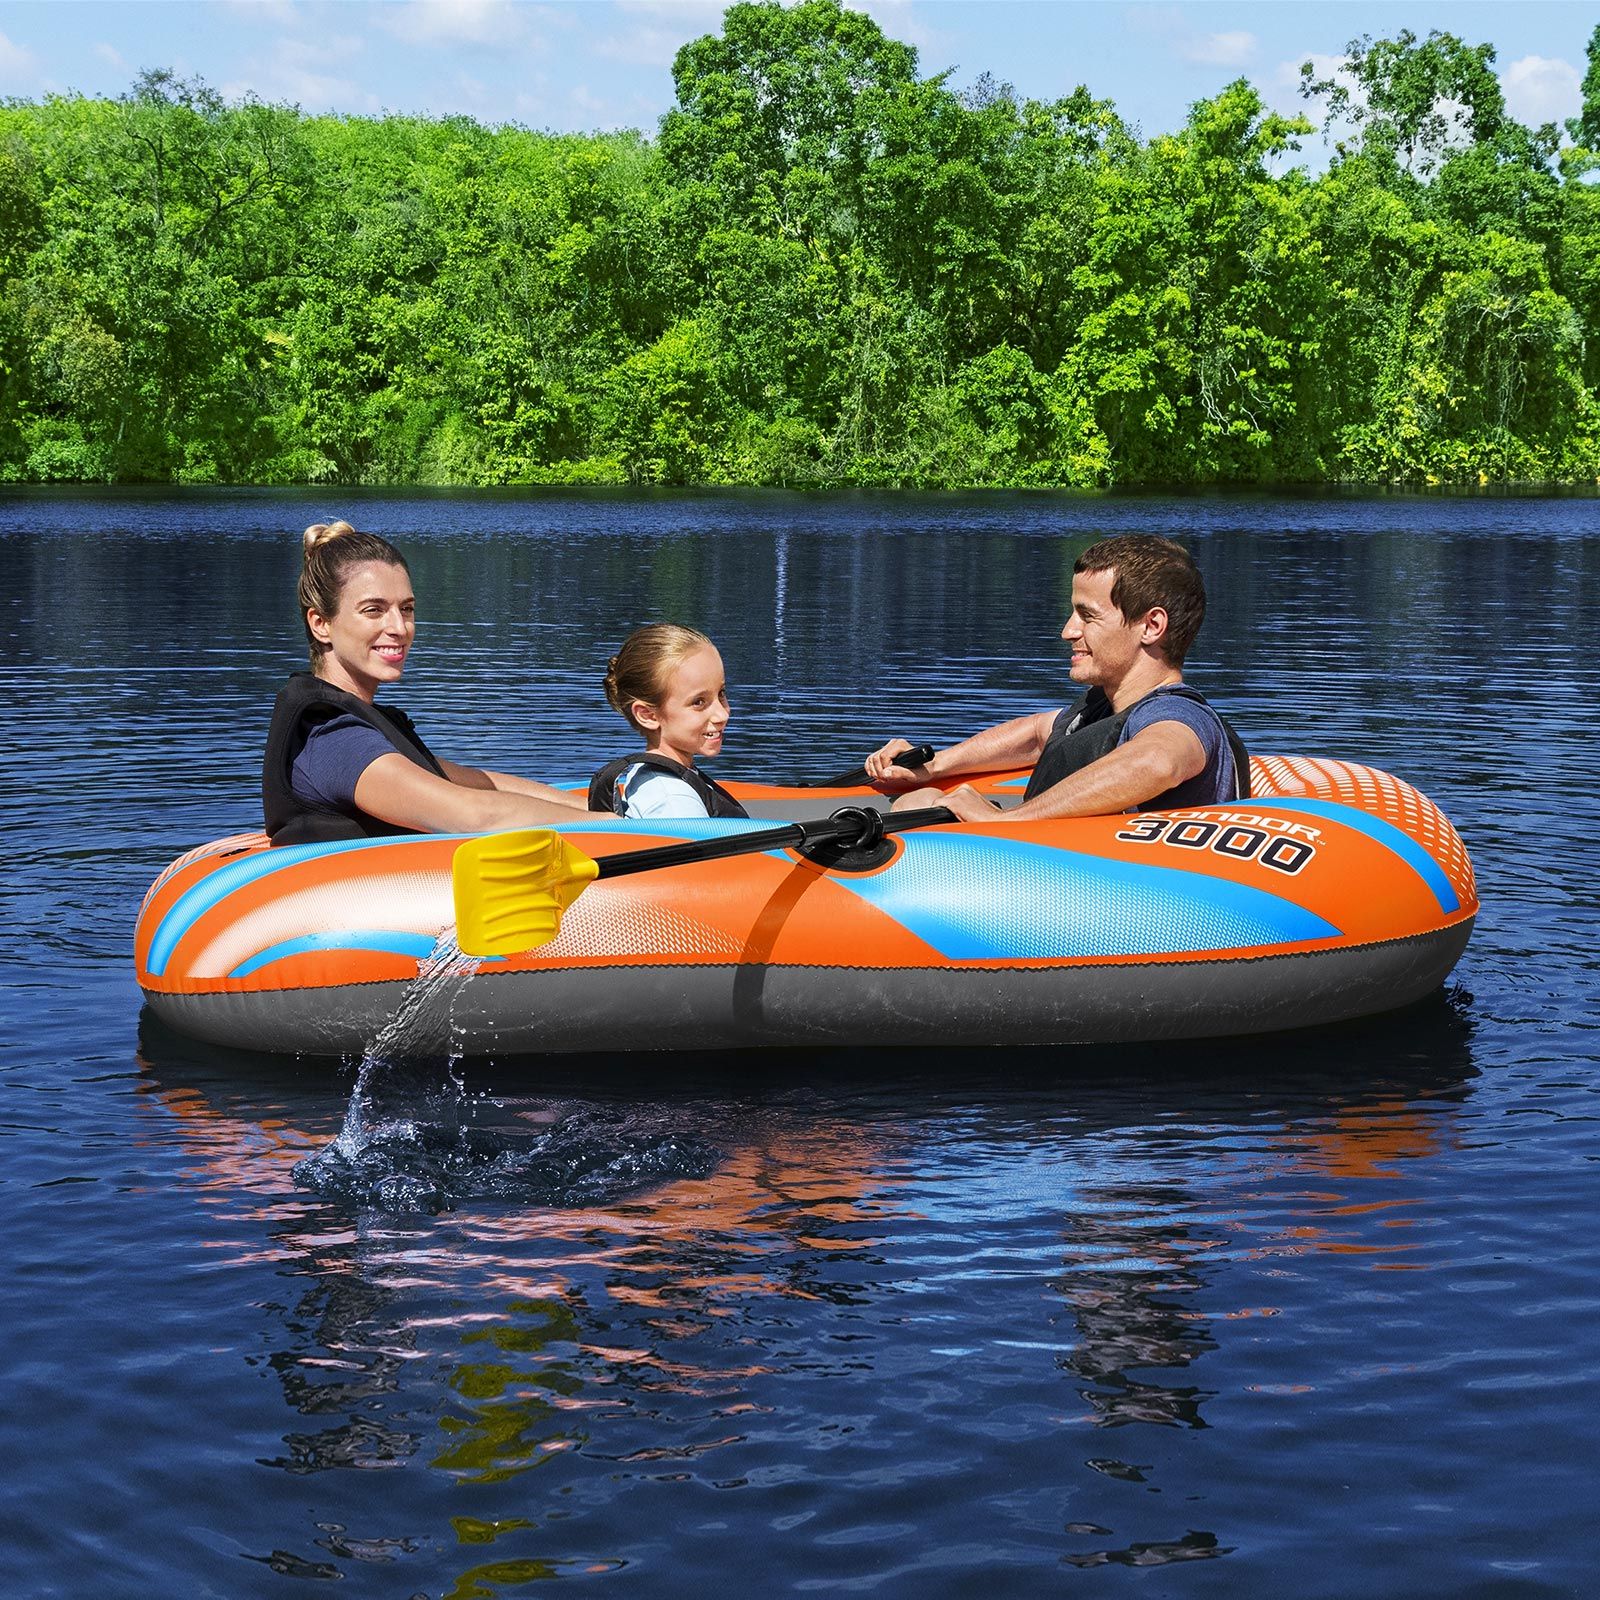 Bestway Inflatable Boat Blow Up Fishing Rowing Rafting Paddling Water Sport Floating Raft Air Diving River Canoe with Oars Hand Pump